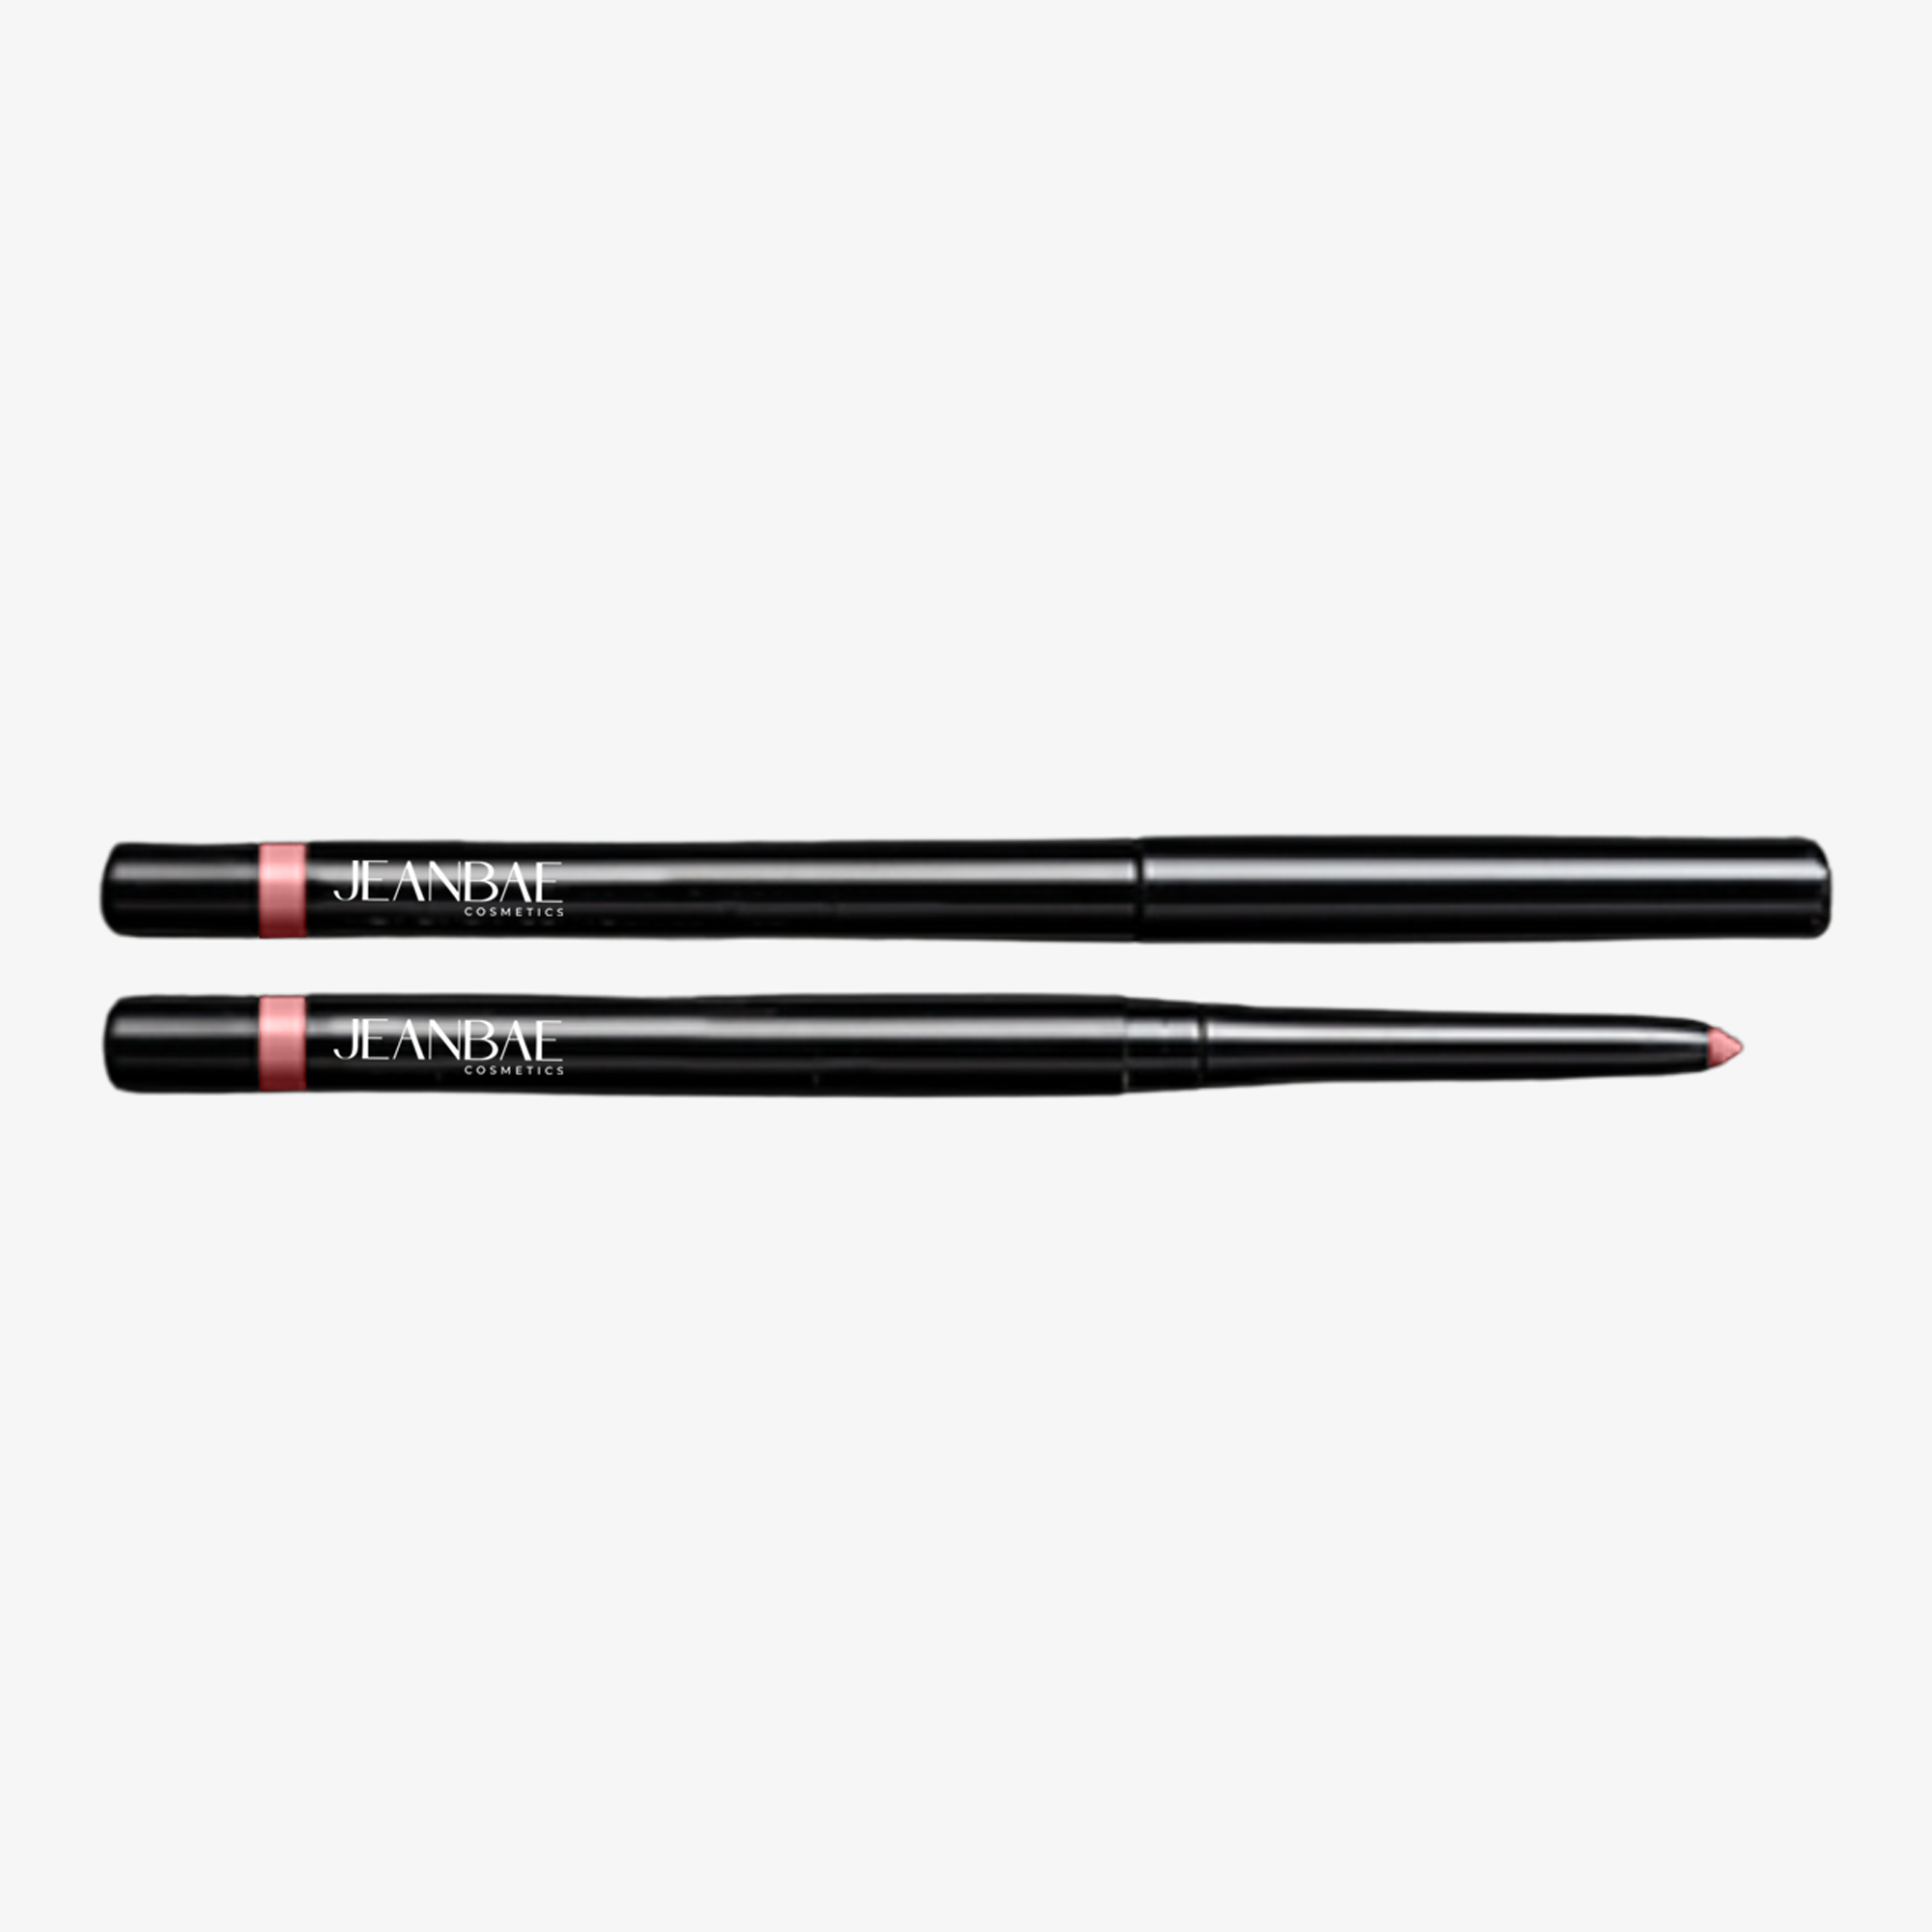 Resize and reshape the appearance of lips with super creamy waterproof lip liner.  THIS PRODUCT IS Cruelty-Free, Hypoallergenic, Non-Comedogenic, Halal Certified, and EU Compliant. Free of Parabens and Fragrances